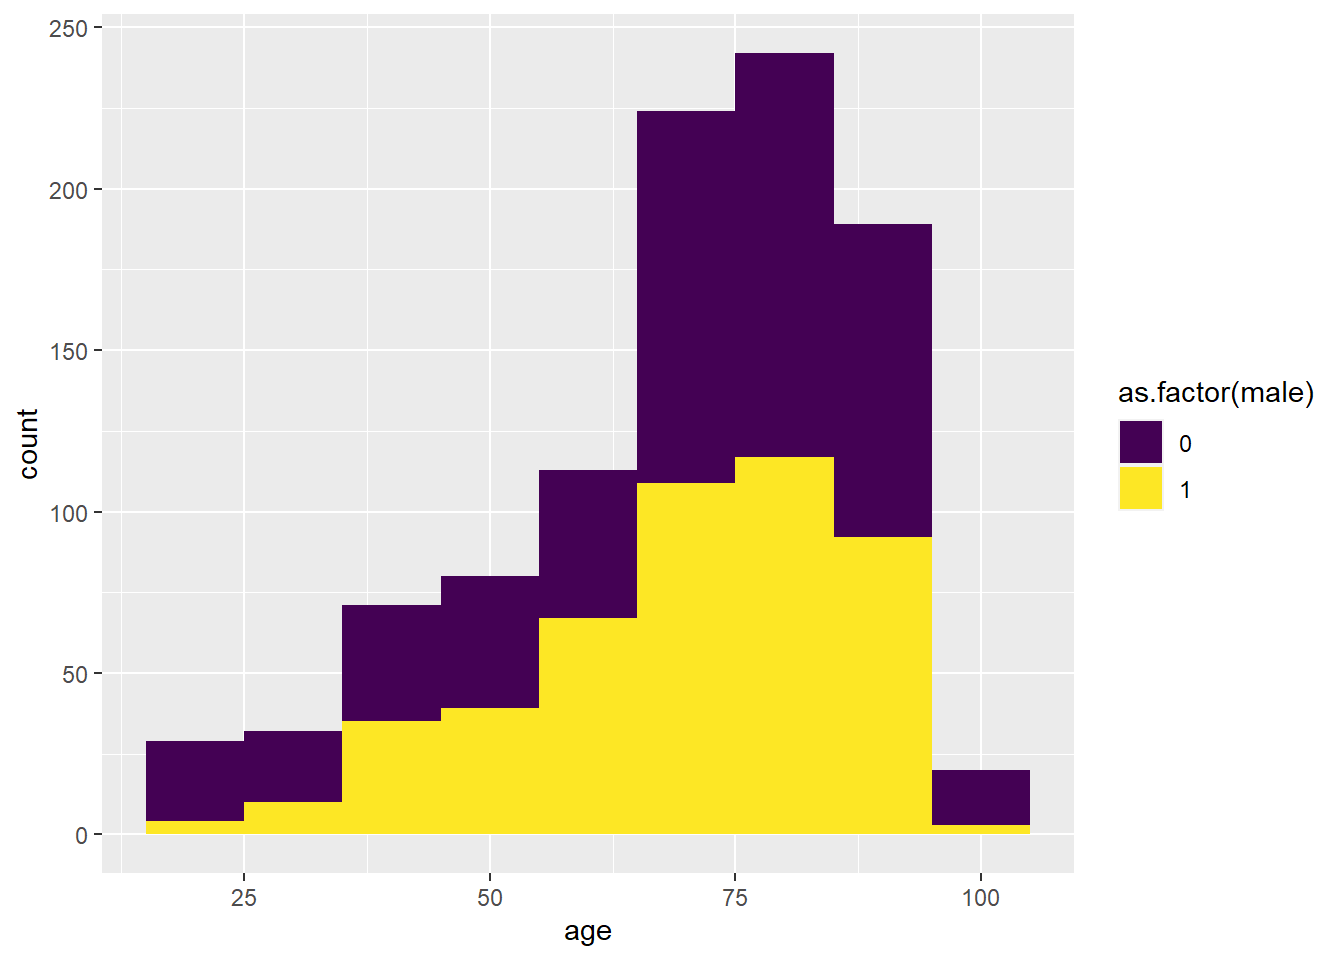 A histogram of age separated by sex created using ggplot2